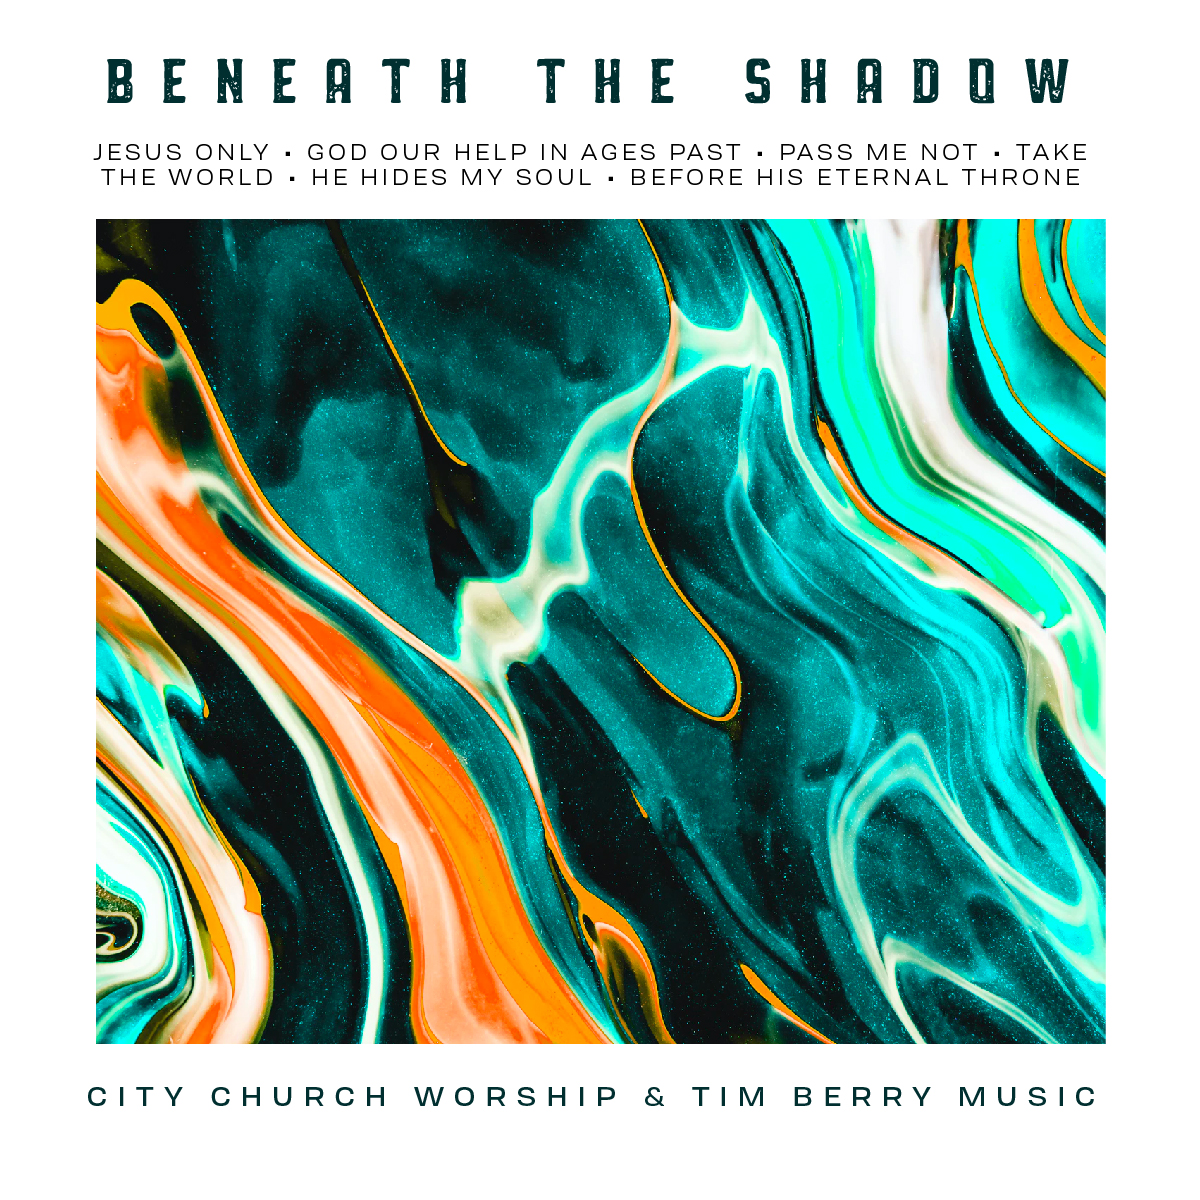 Album cover for 'Beneath the Shadow' by City Church Worship